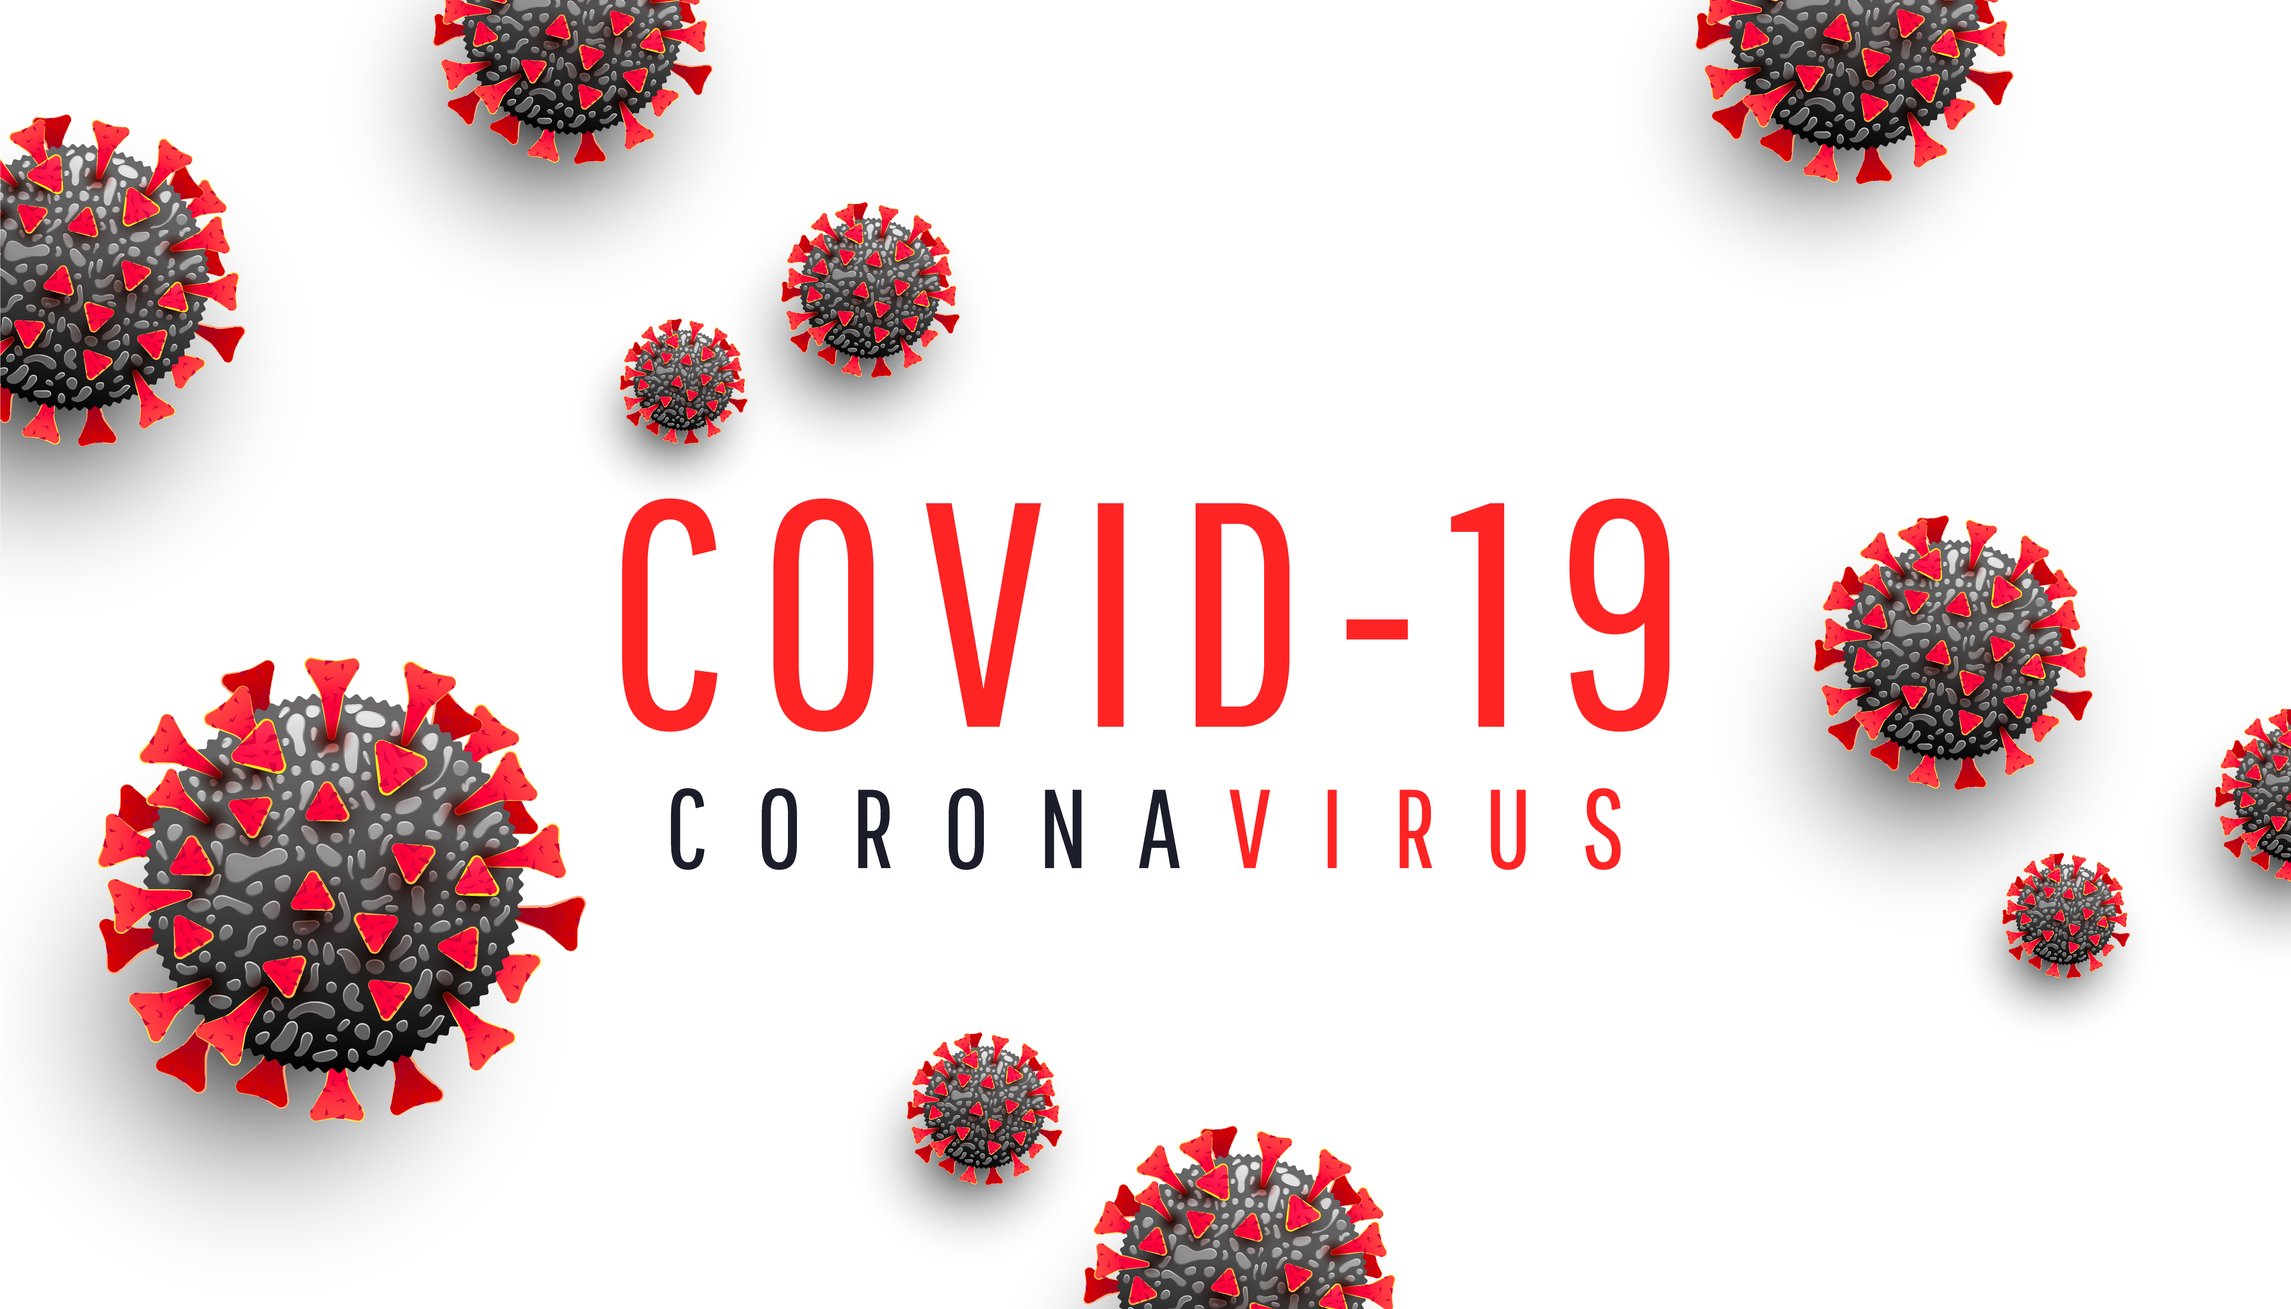 Horizontal vector illustration of Coronavirus disease COVID-19 medical web banner with SARS-CoV-2 virus molecule and text on a white background.  | Photo: Getty Images